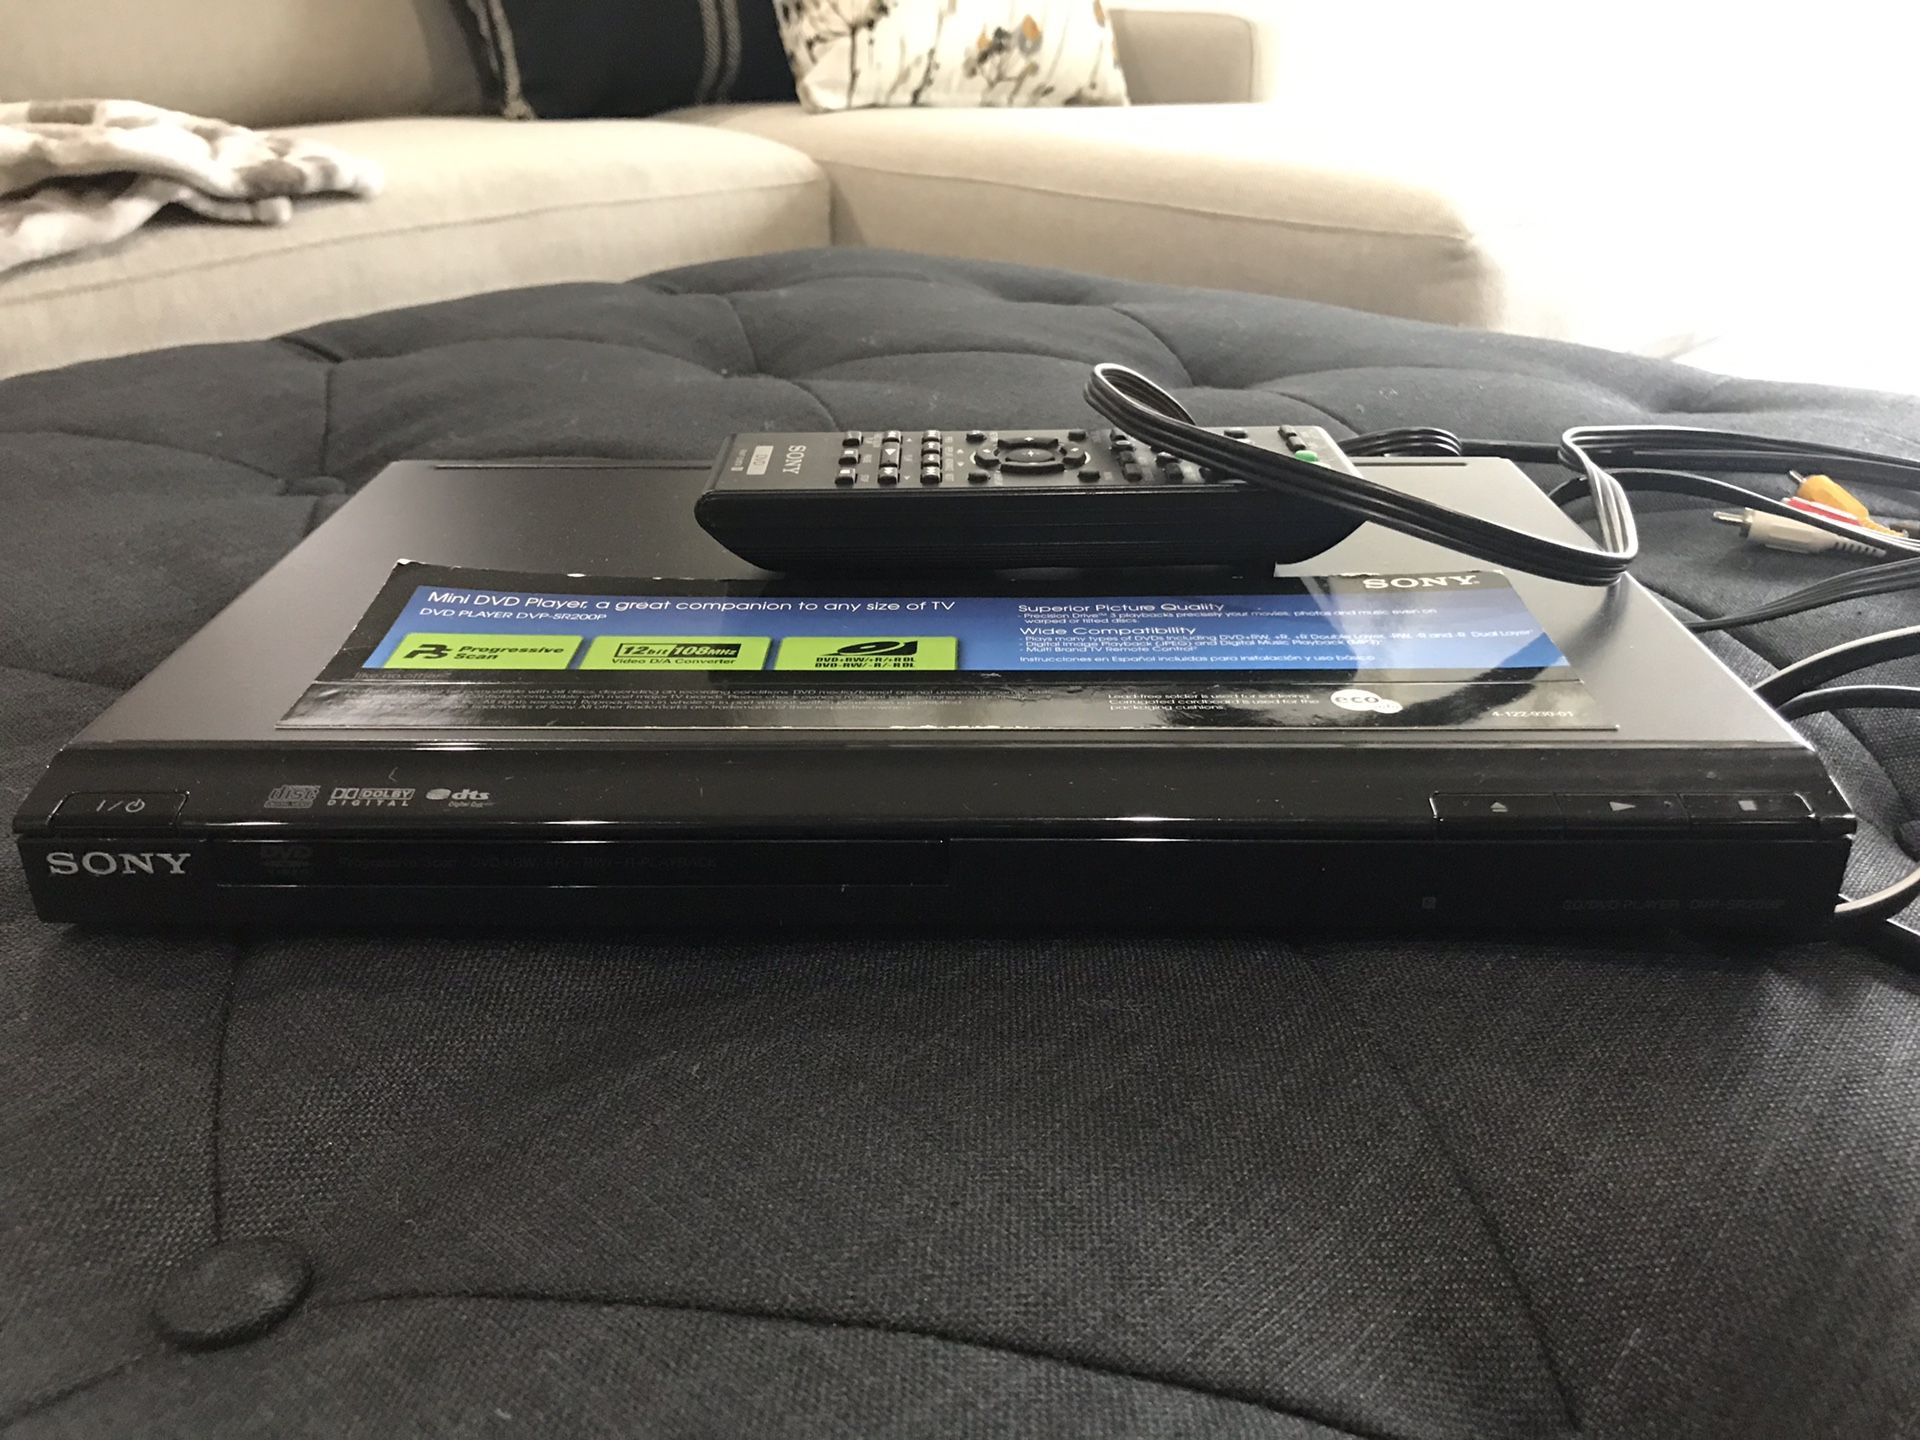 Sony CD/ DVD Player for sale for $10 non HDMI